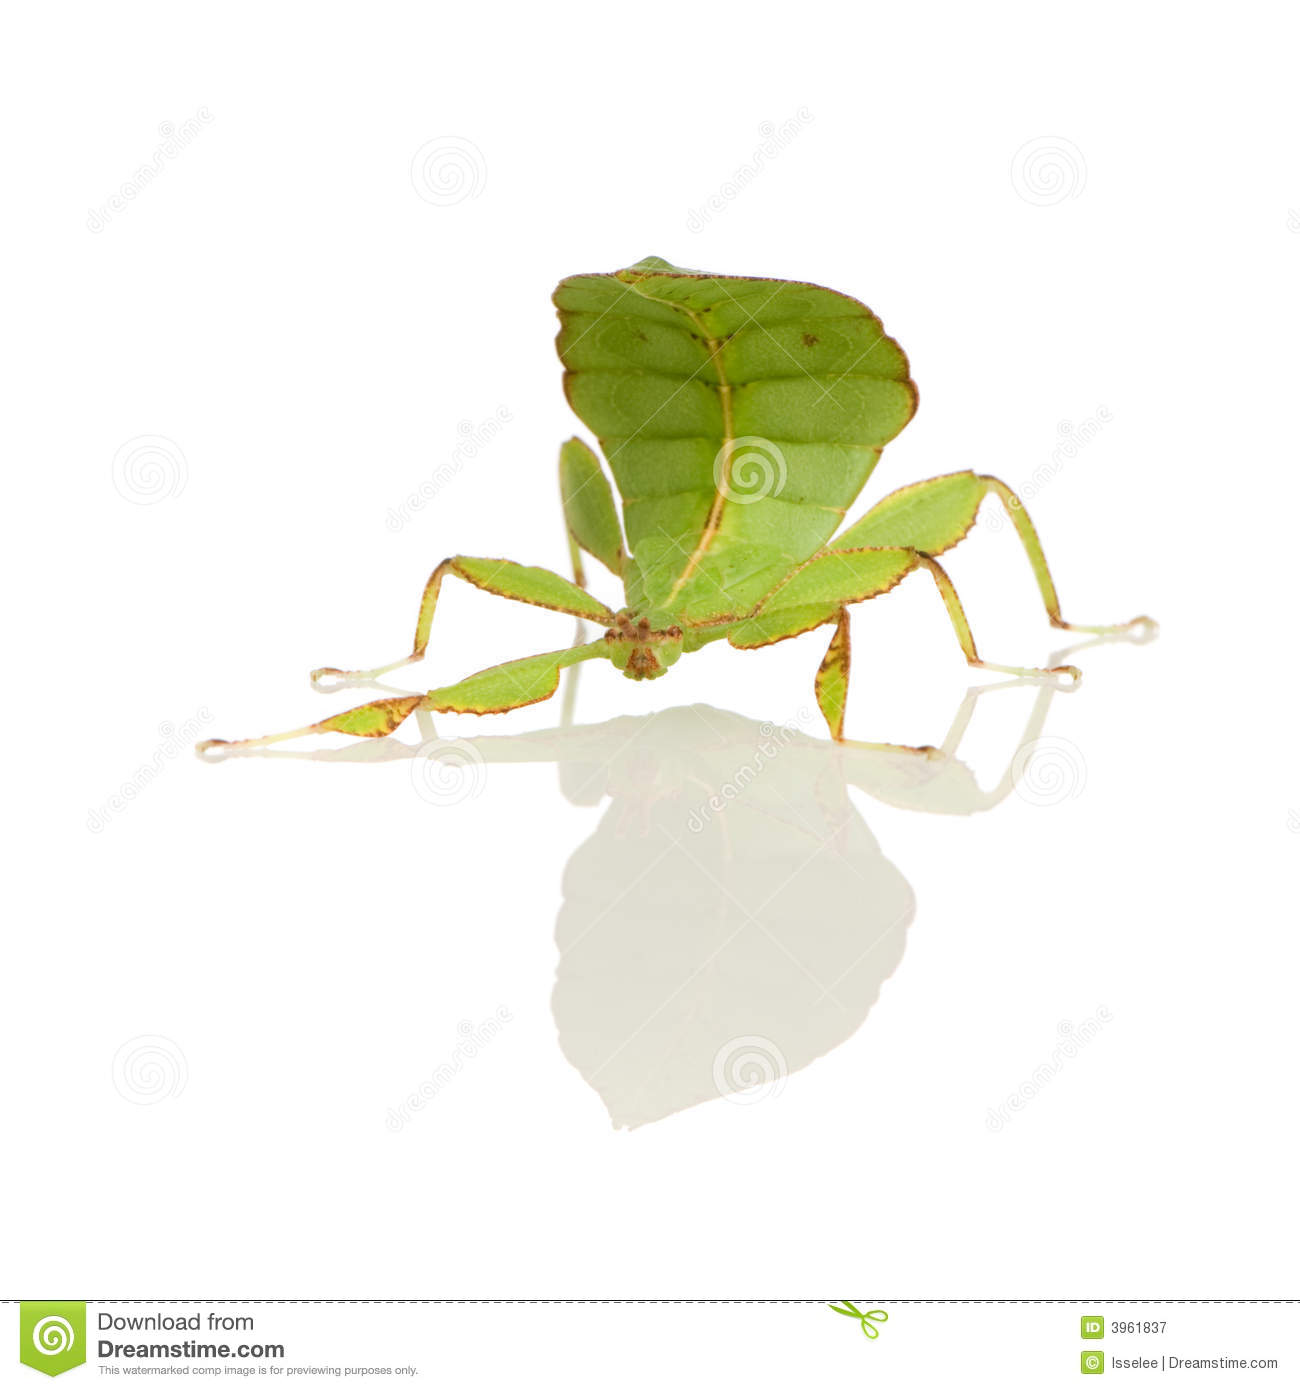 Leaf Insect, Phylliidae.